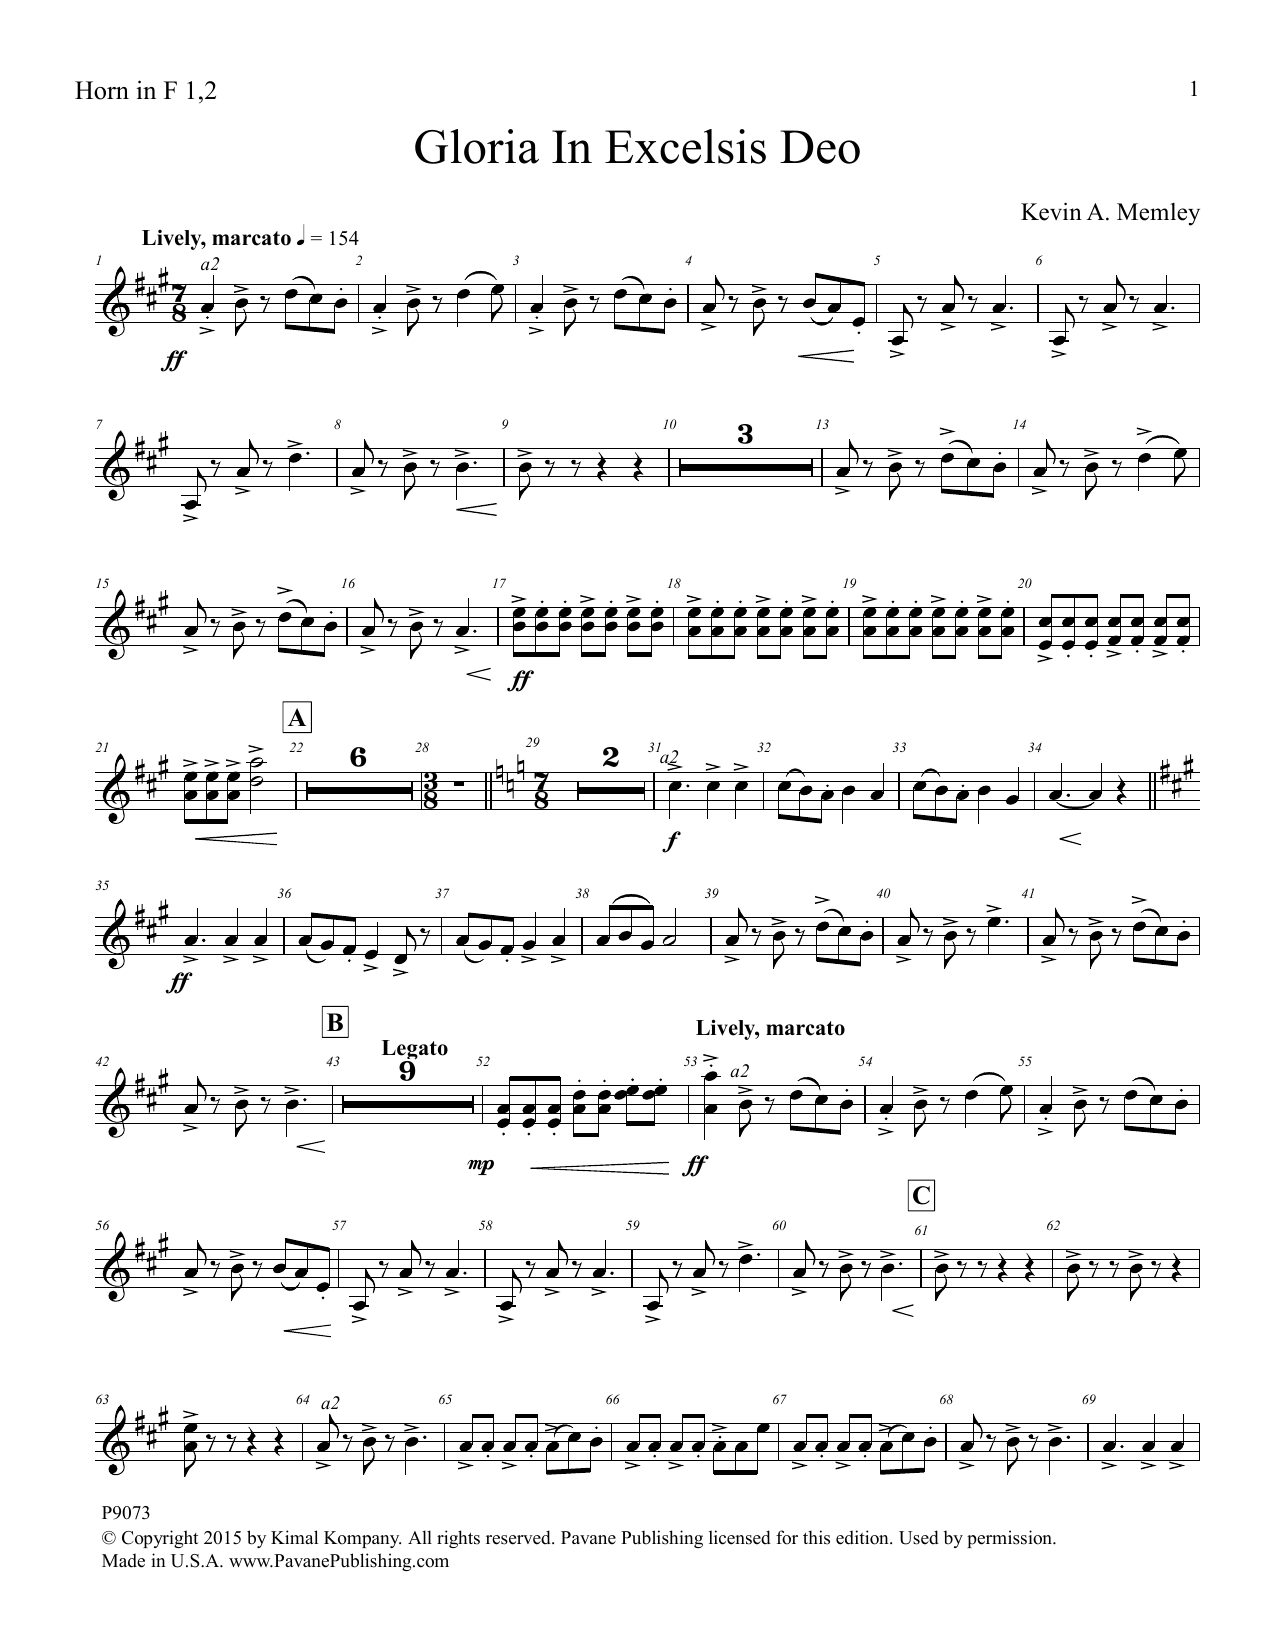 Download Kevin A. Memley Gloria in Excelsis Deo - Horn 1, 2, 3, Sheet Music